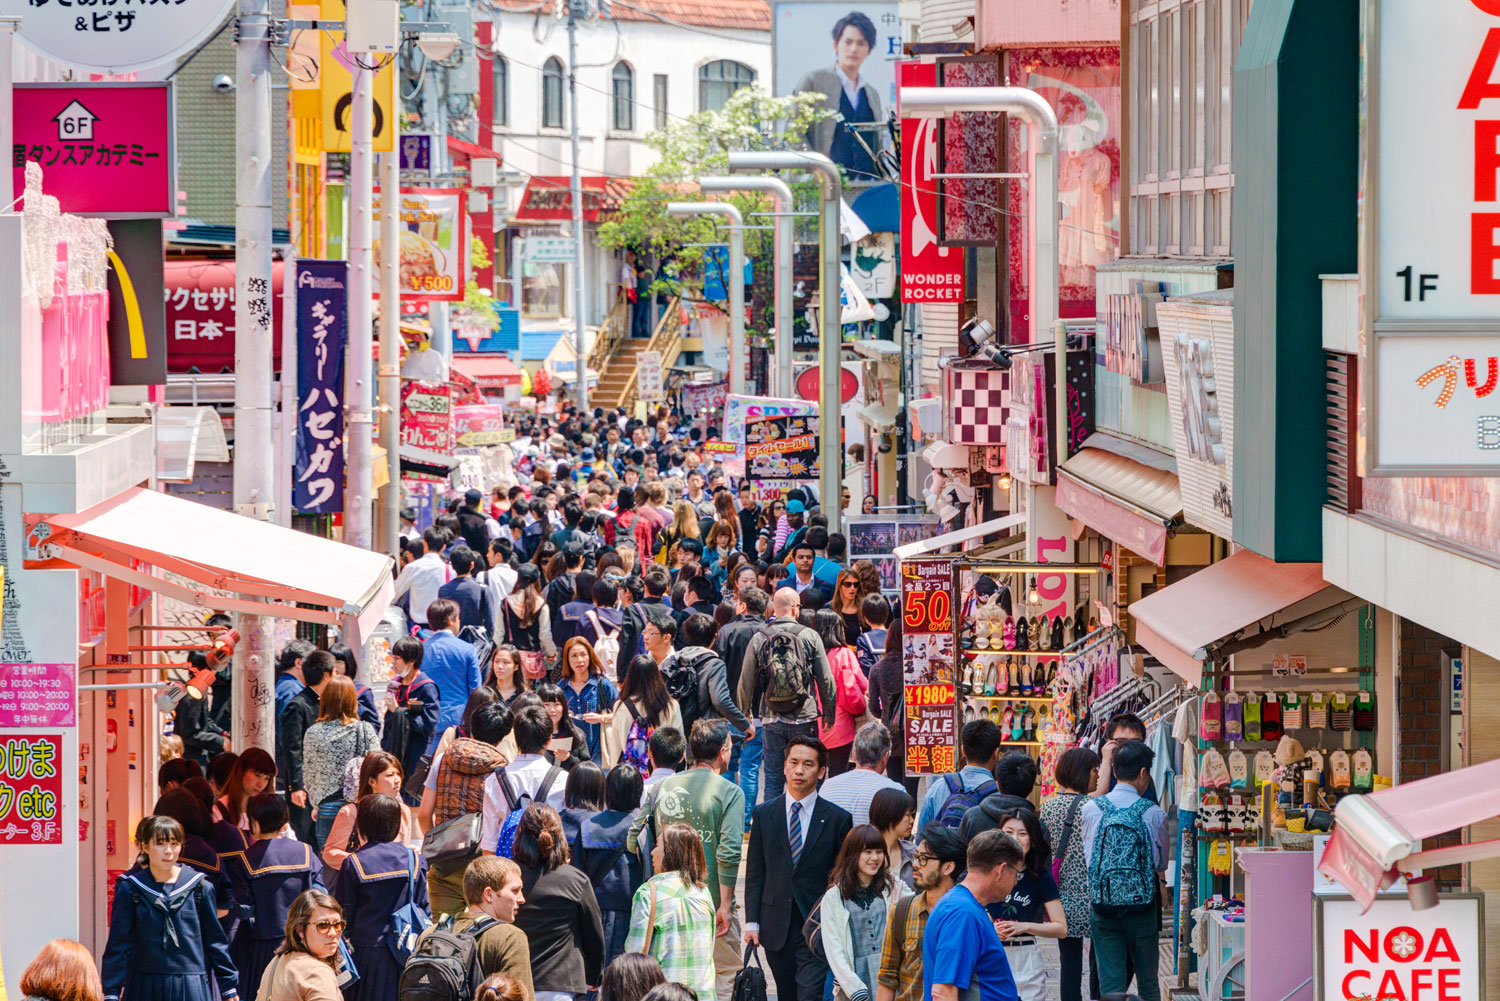 Also known as Omotesando, this is the Harajuku neighbourhood in Tokyo.